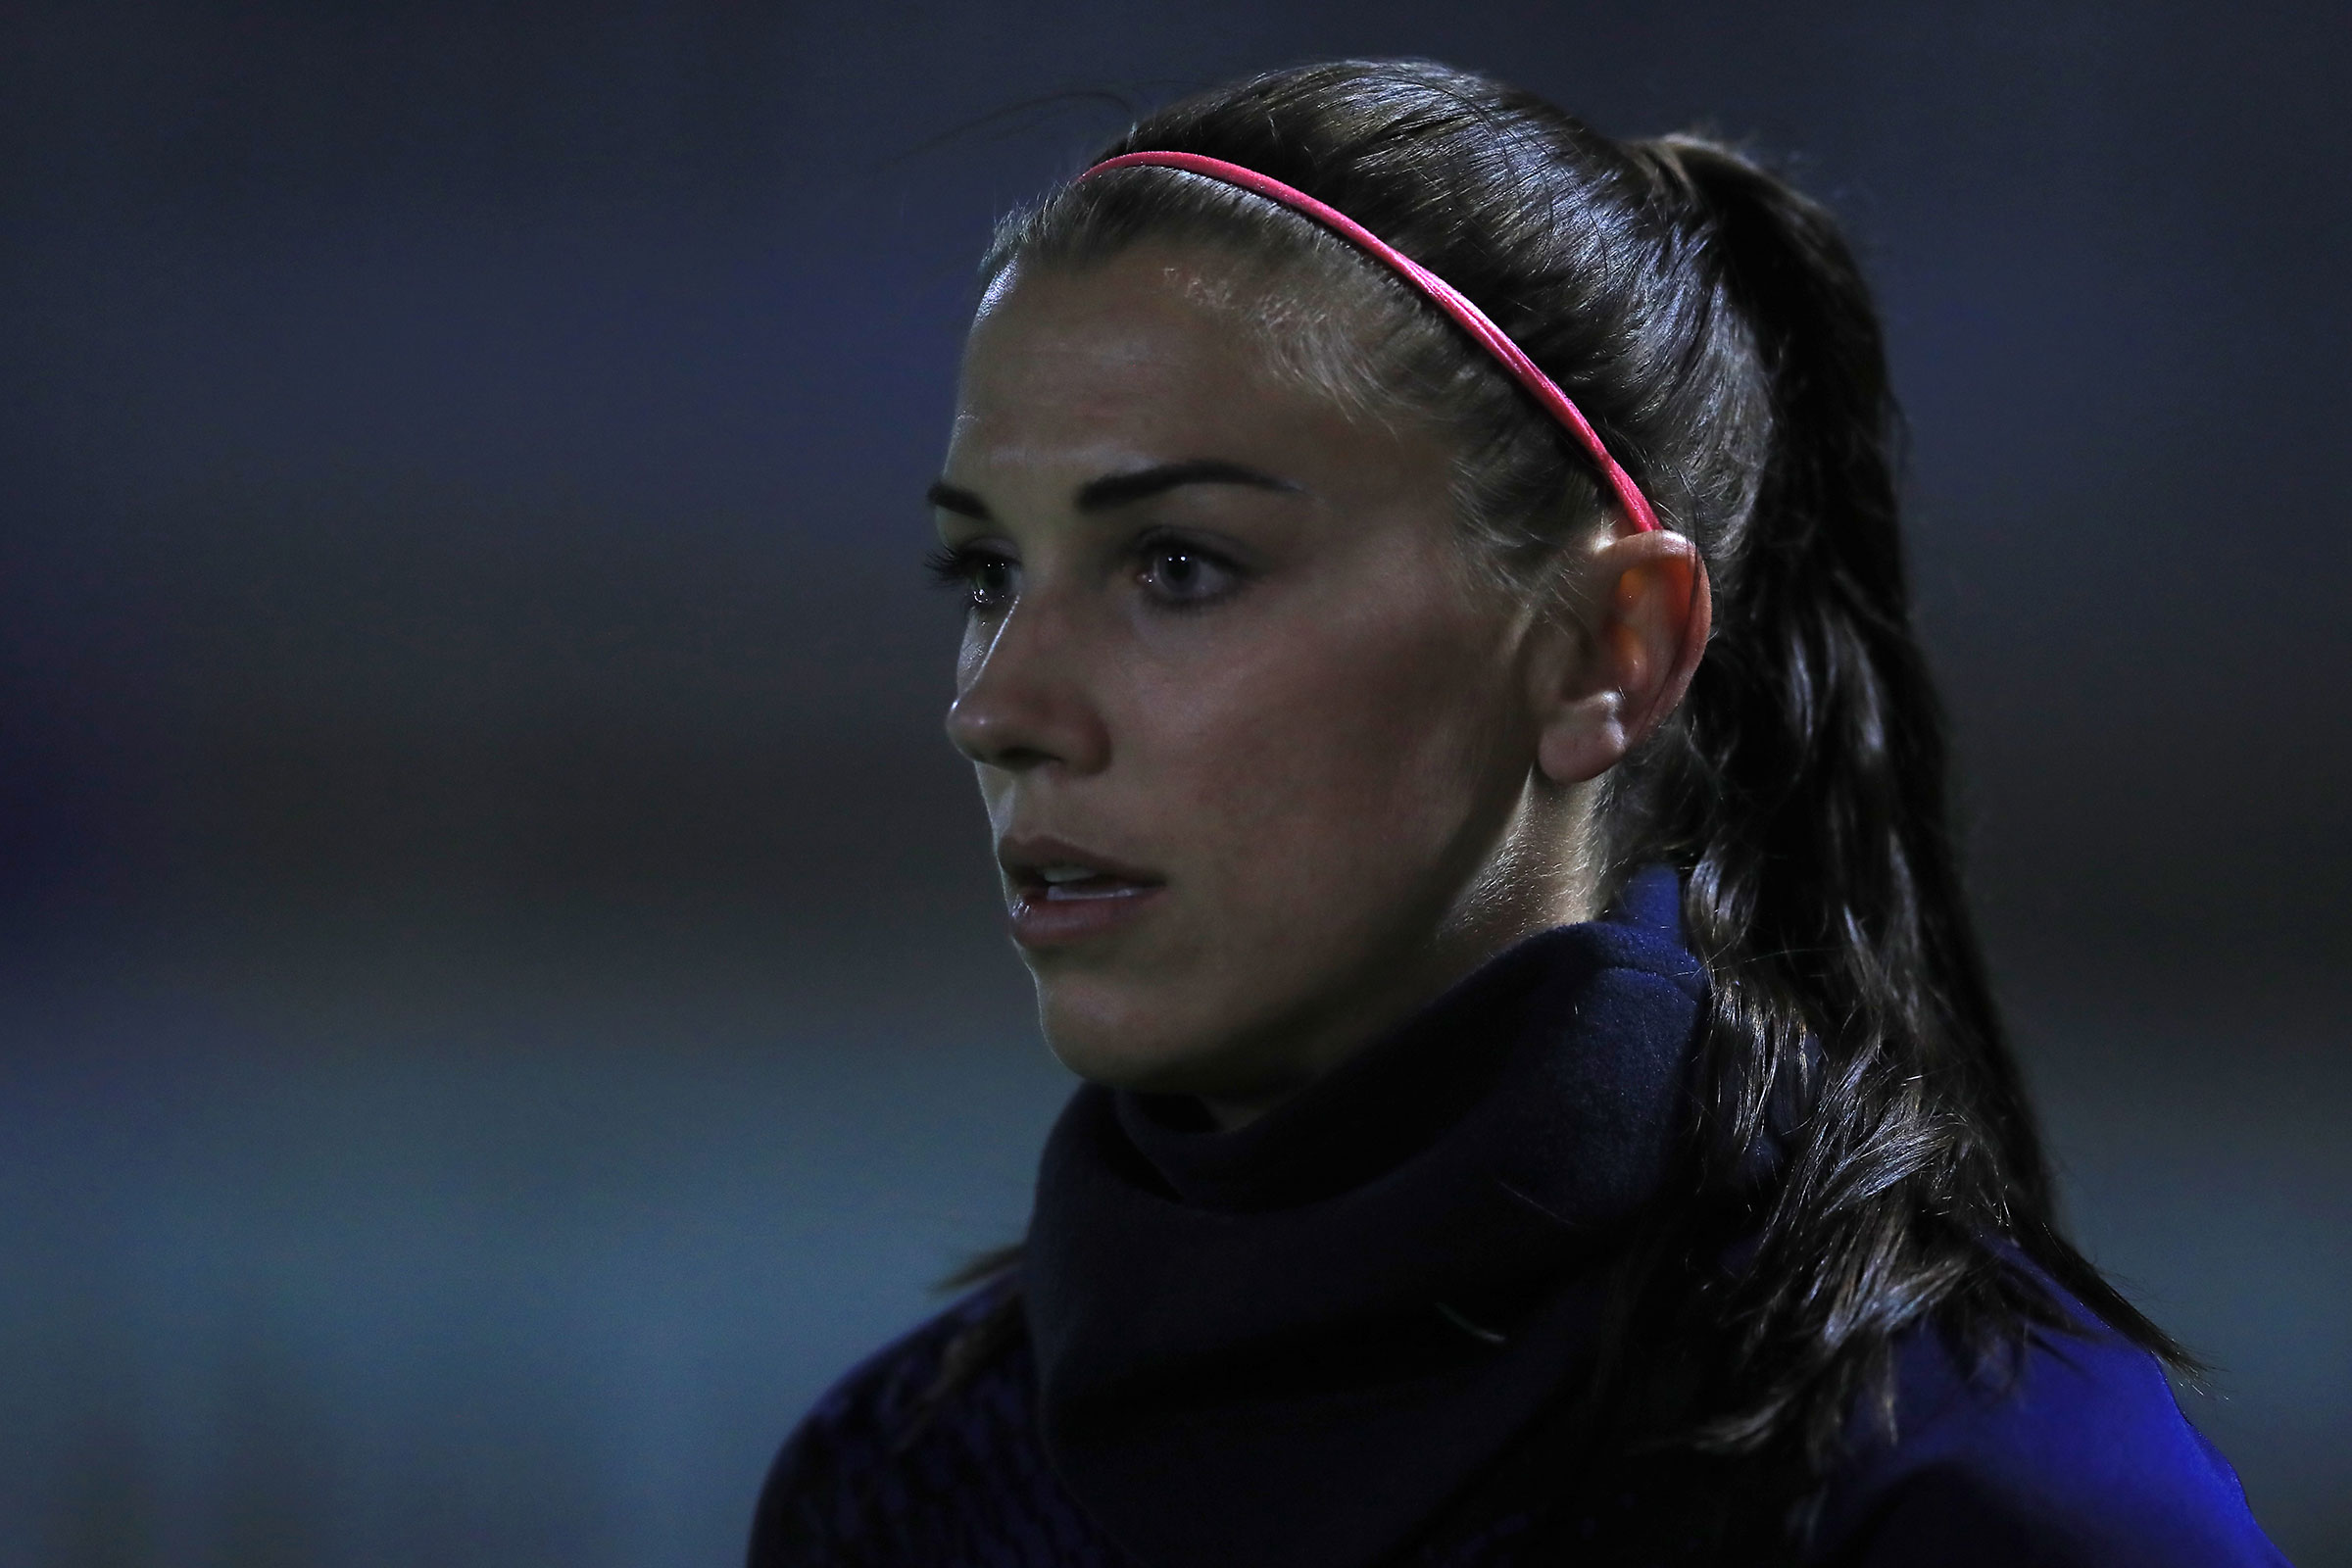 Tottenham Hotspur's Alex Morgan warming up before the Continental Cup match at Meadow Park, London.